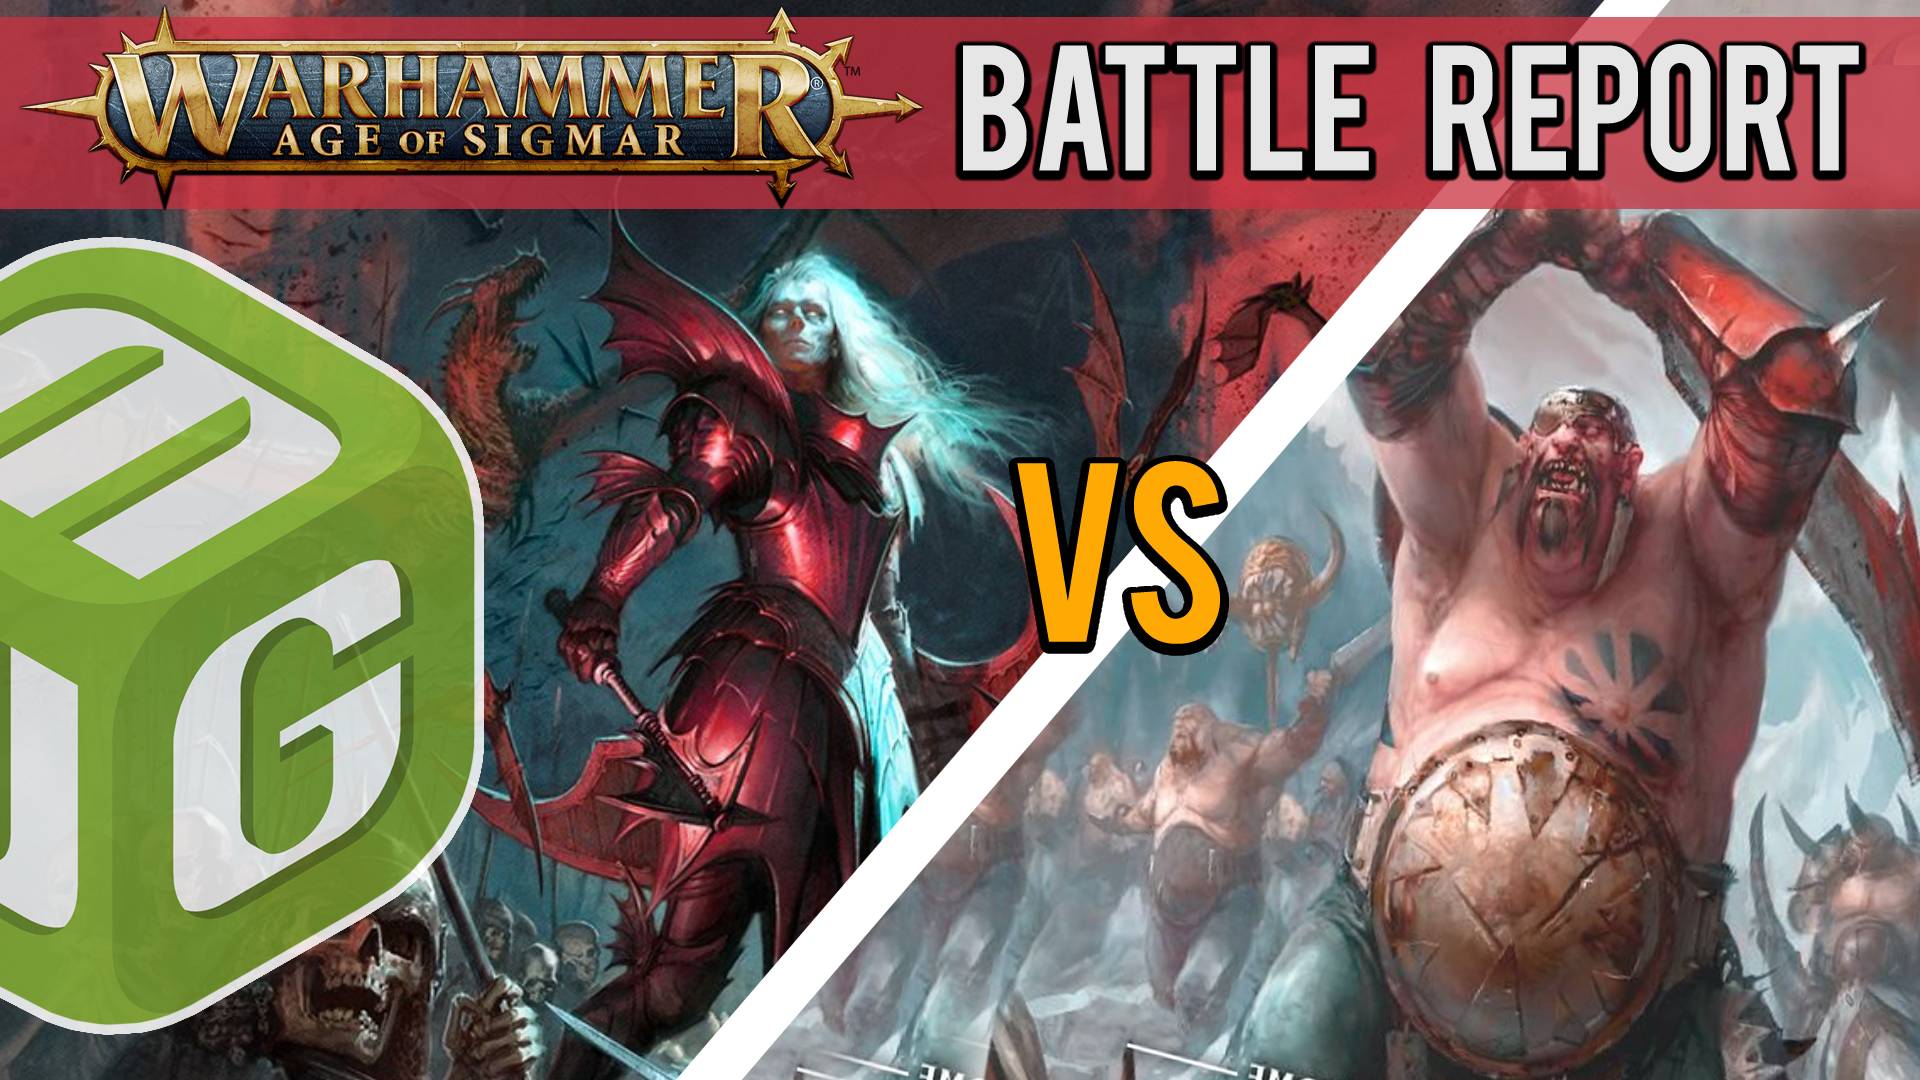 Army Lists for Ogor Mawtribes vs Soulblight Gravelords Warhammer Age of Sigmar Battle Report - The Lost City Ep 29